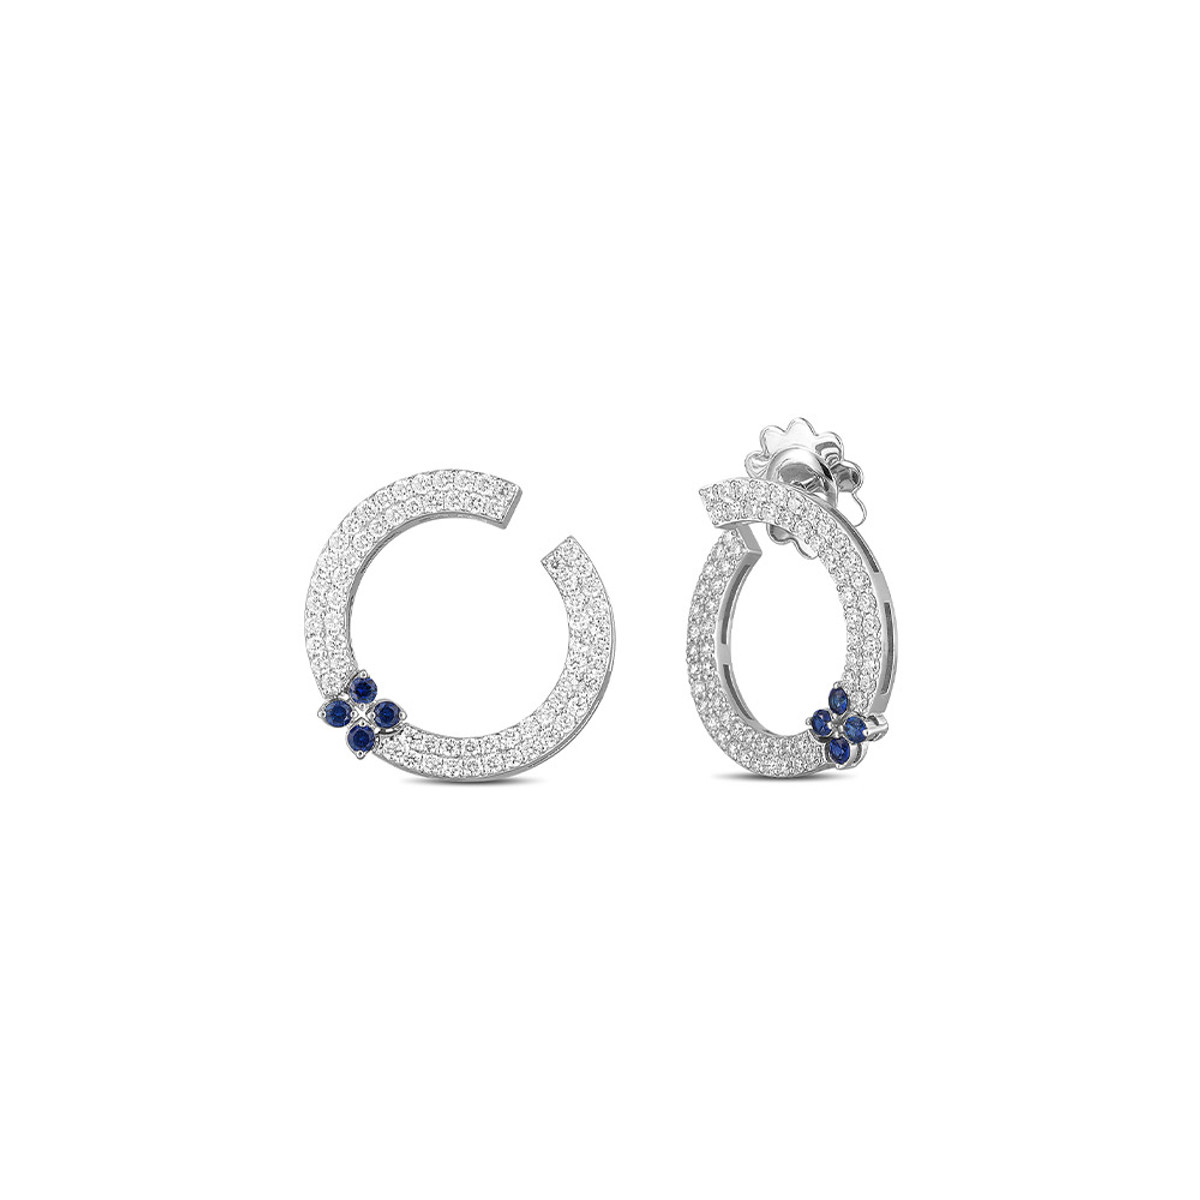 Roberto Coin 18K White Gold Love in Verona Diamond and Blue Sapphire Circle Earrings-57365